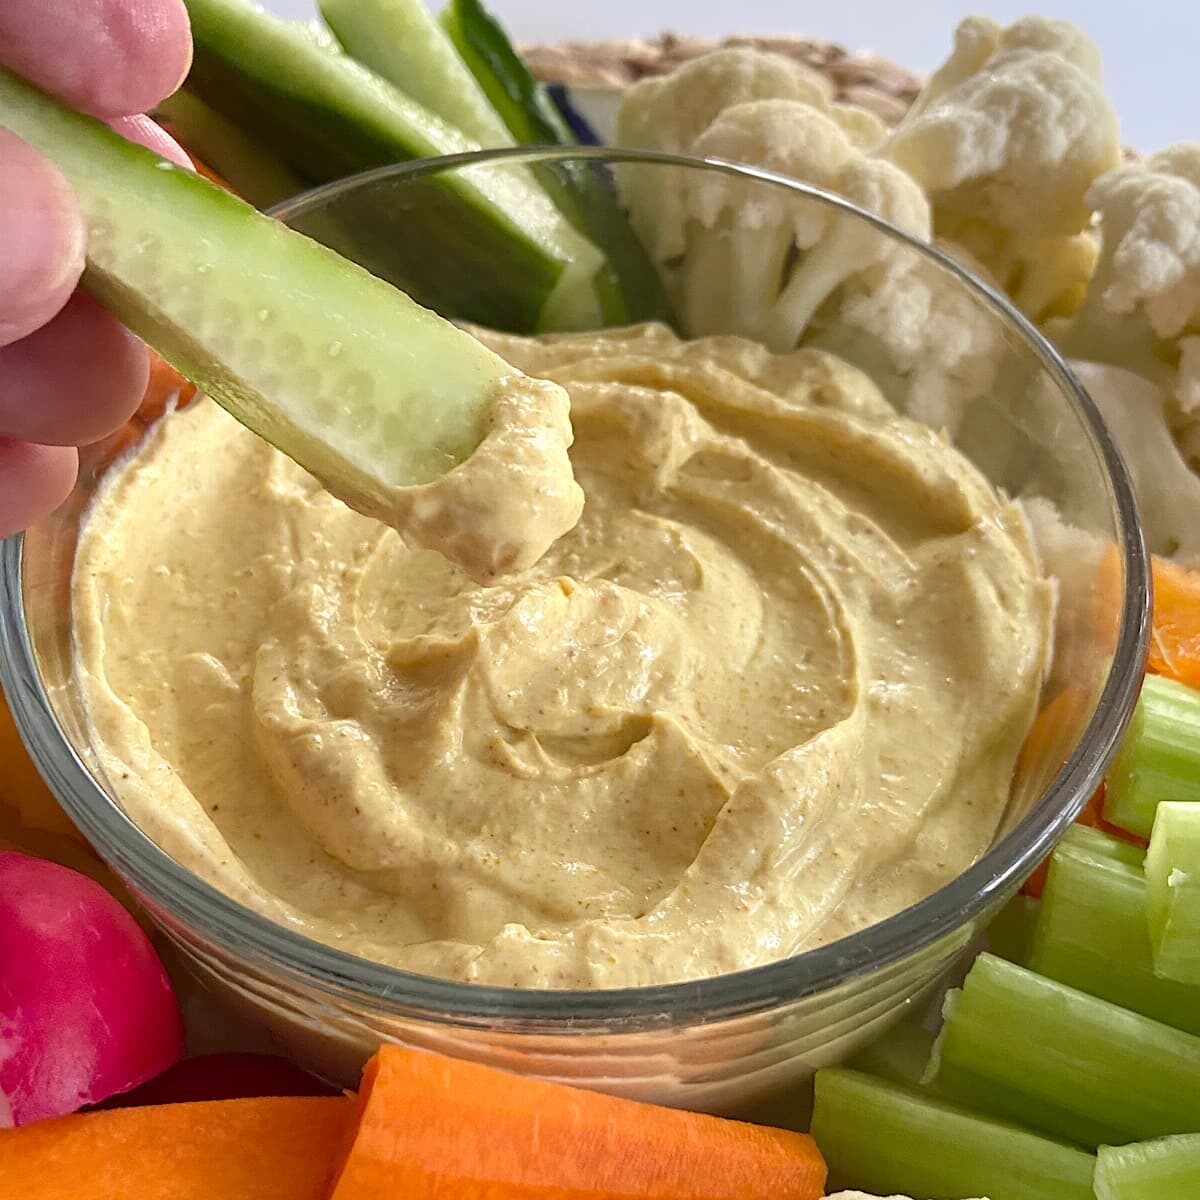 Close up picture of a bowl of curry dip with chopped vegetables.